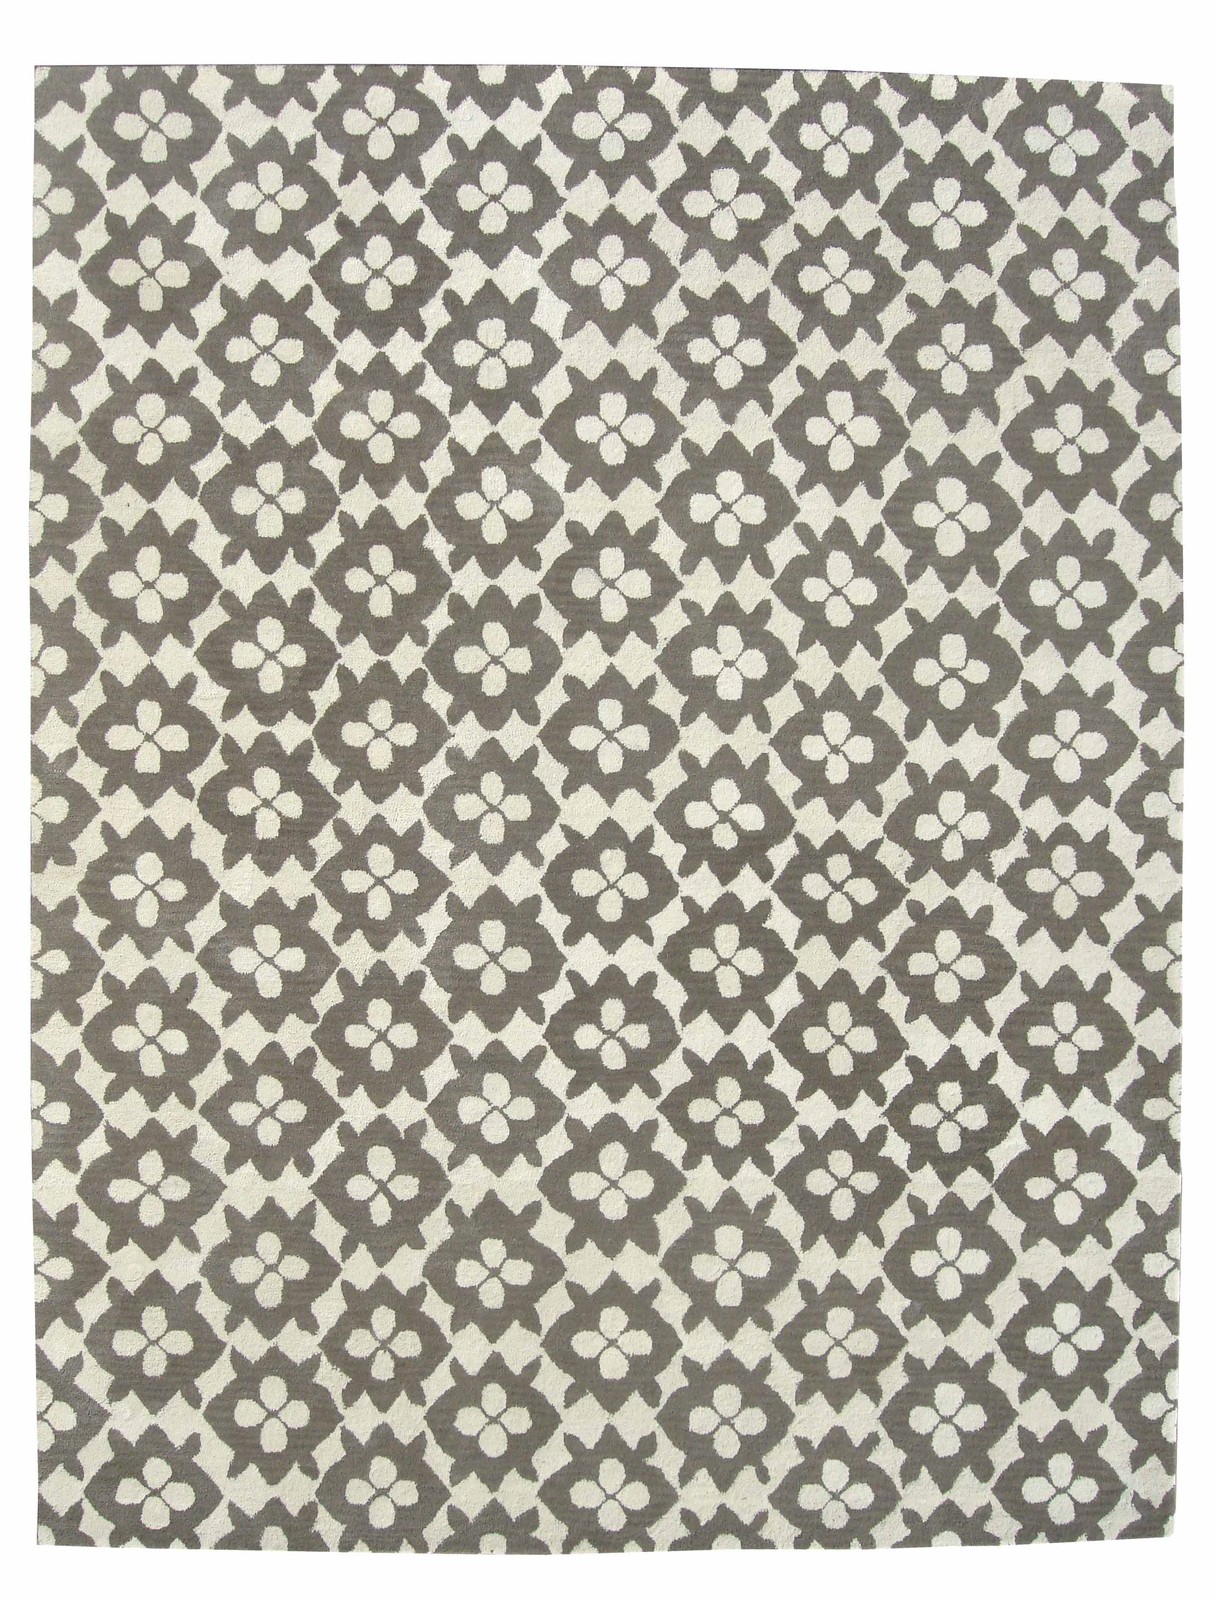 Primary image for Hand Tufted Diamond Basic Gray 8' x 10' Contemporary Woolen Area Rug Carpet